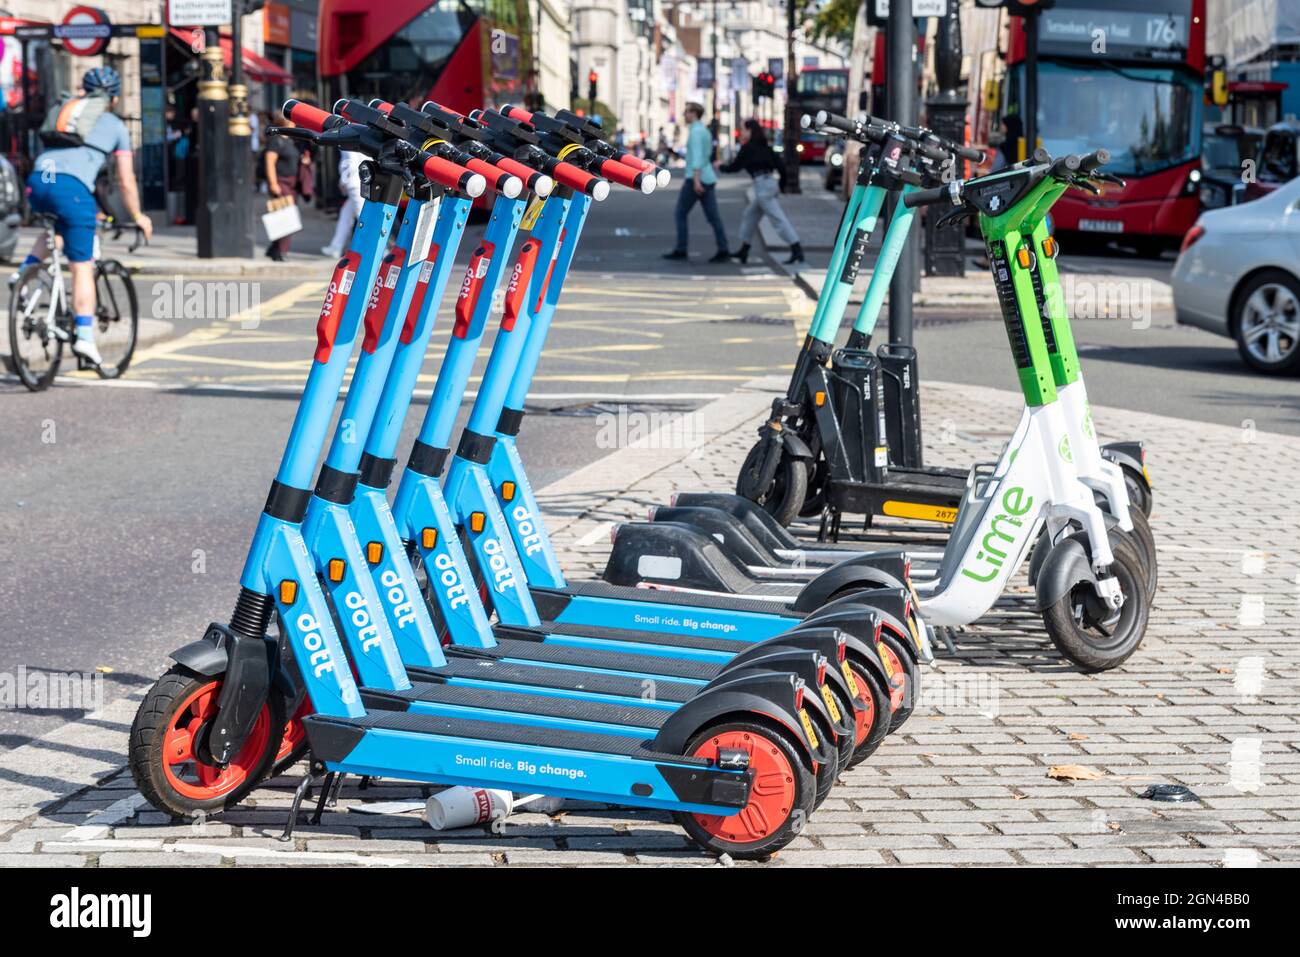 Lime and Dott e scooters for hire in London, UK, with buses and car.  Cyclist and people walking. Busy city scene with electric scooters on  street Stock Photo - Alamy